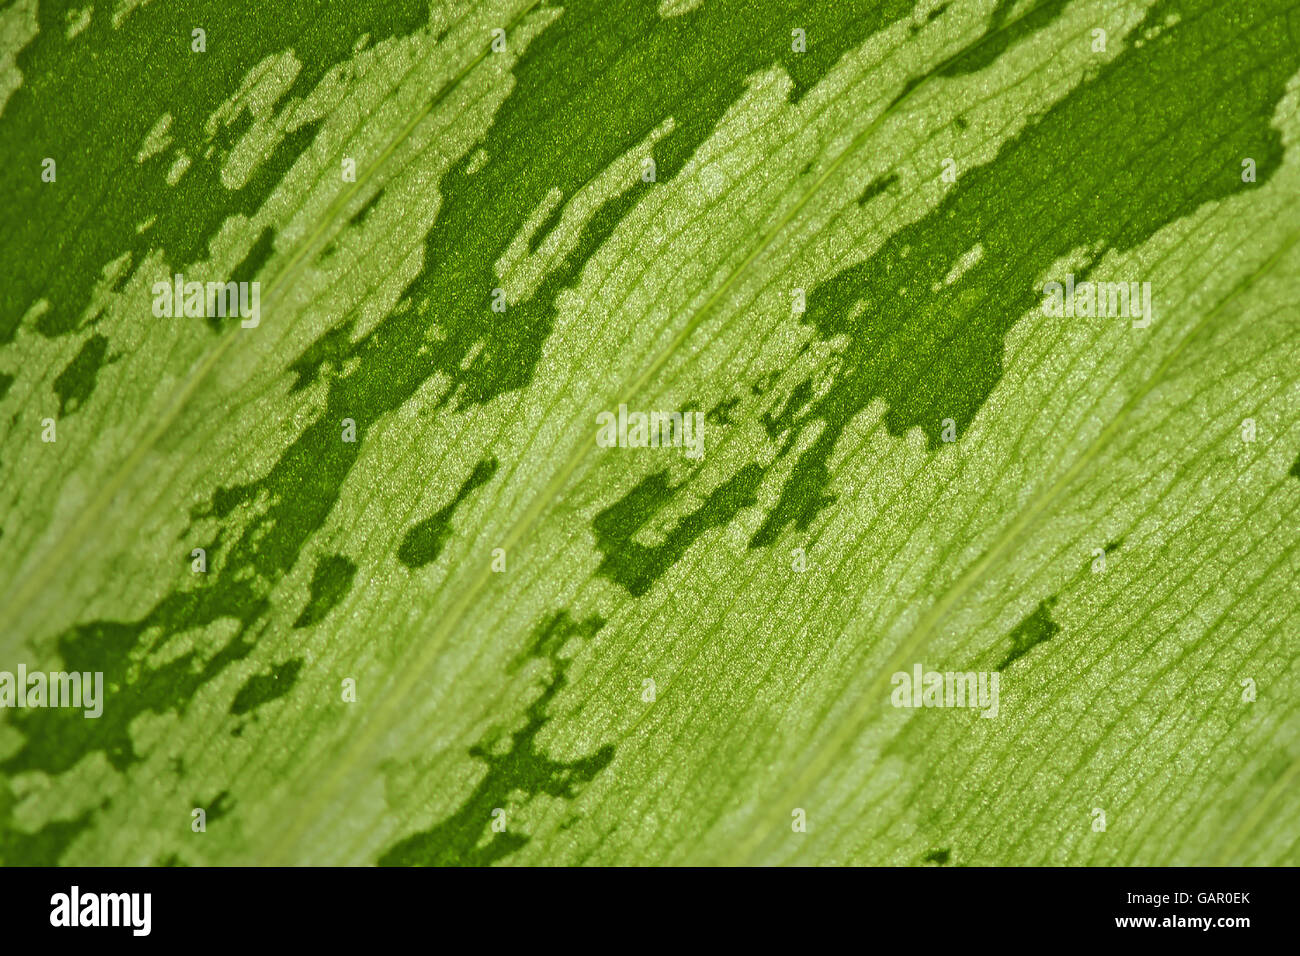 Macro photograph of green leaf texture as background Stock Photo